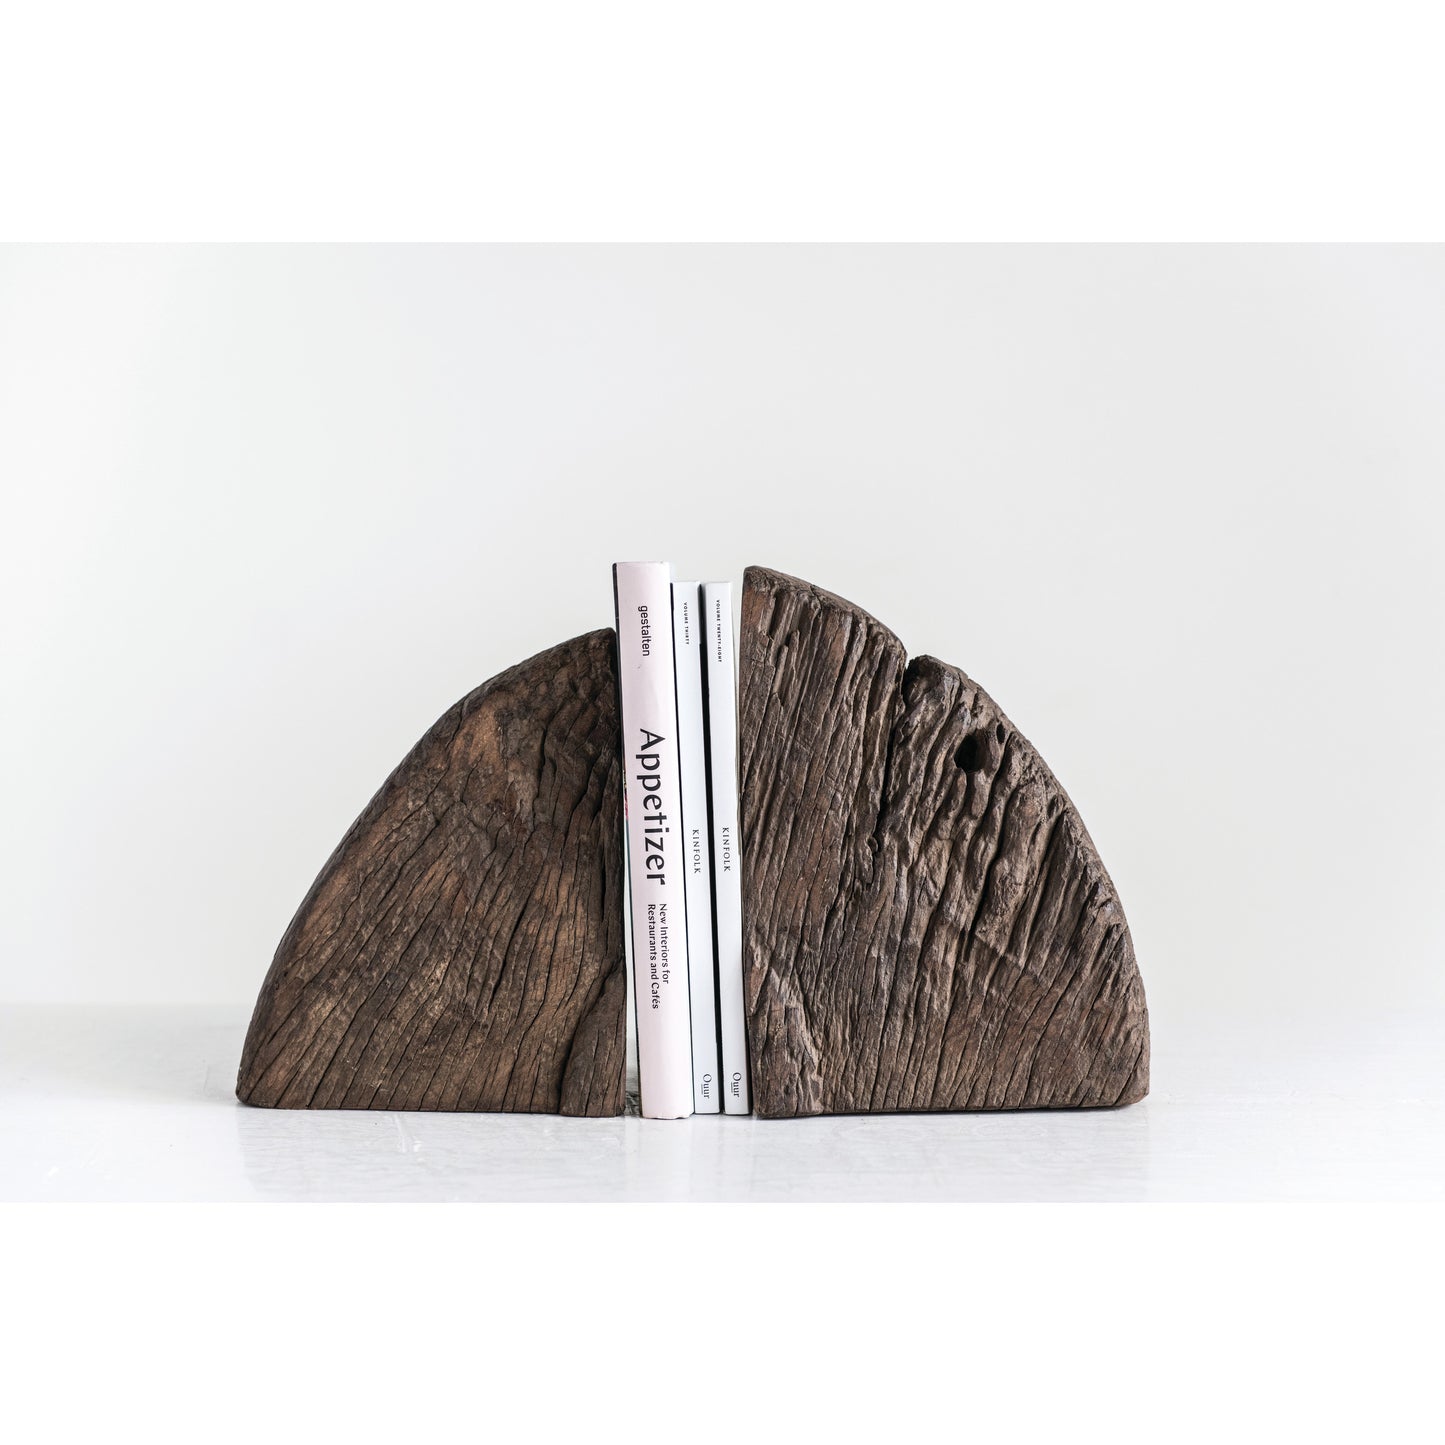 FOUND WOOD BOOKEND